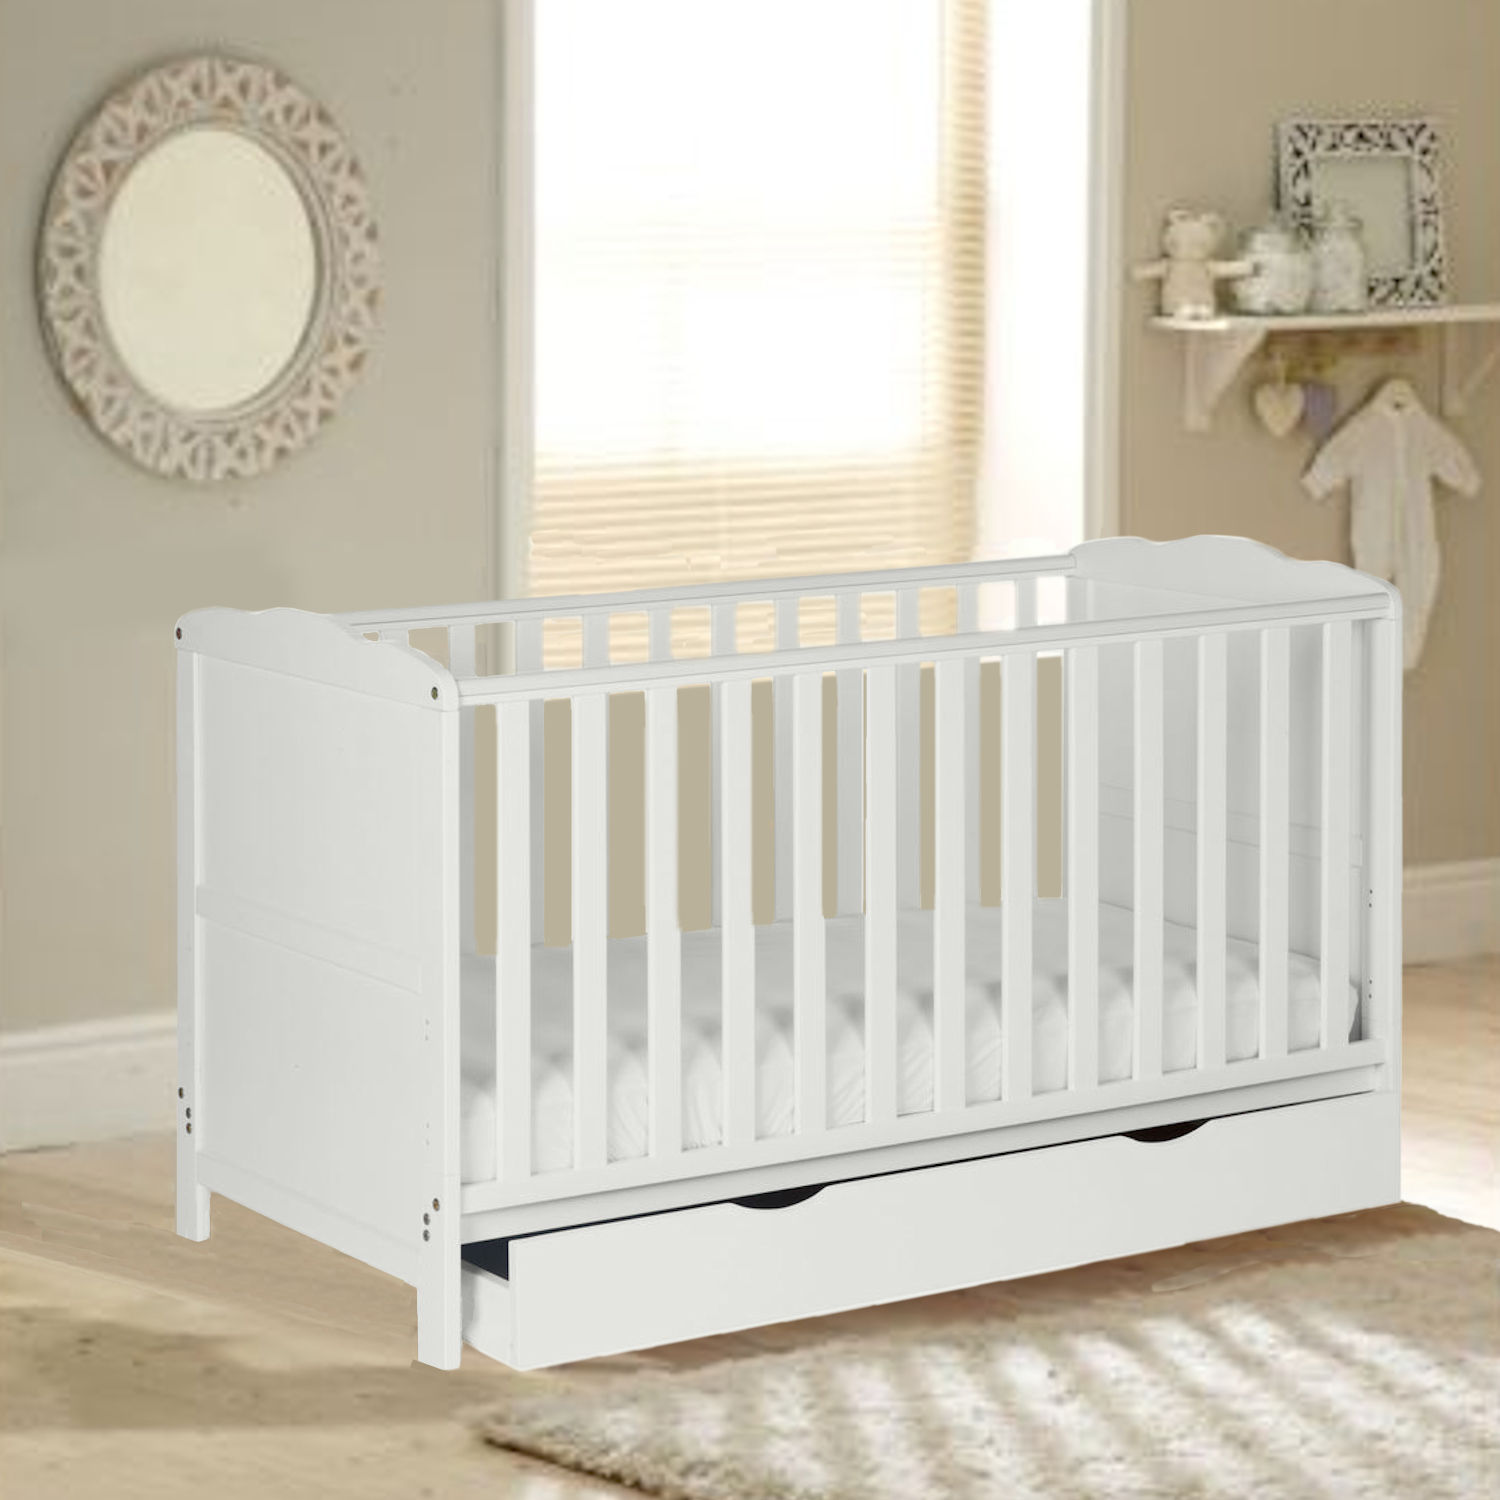 4Baby Classic Deluxe Cot Bed With Drawer & Deluxe Maxi Air Cool Mattress - White